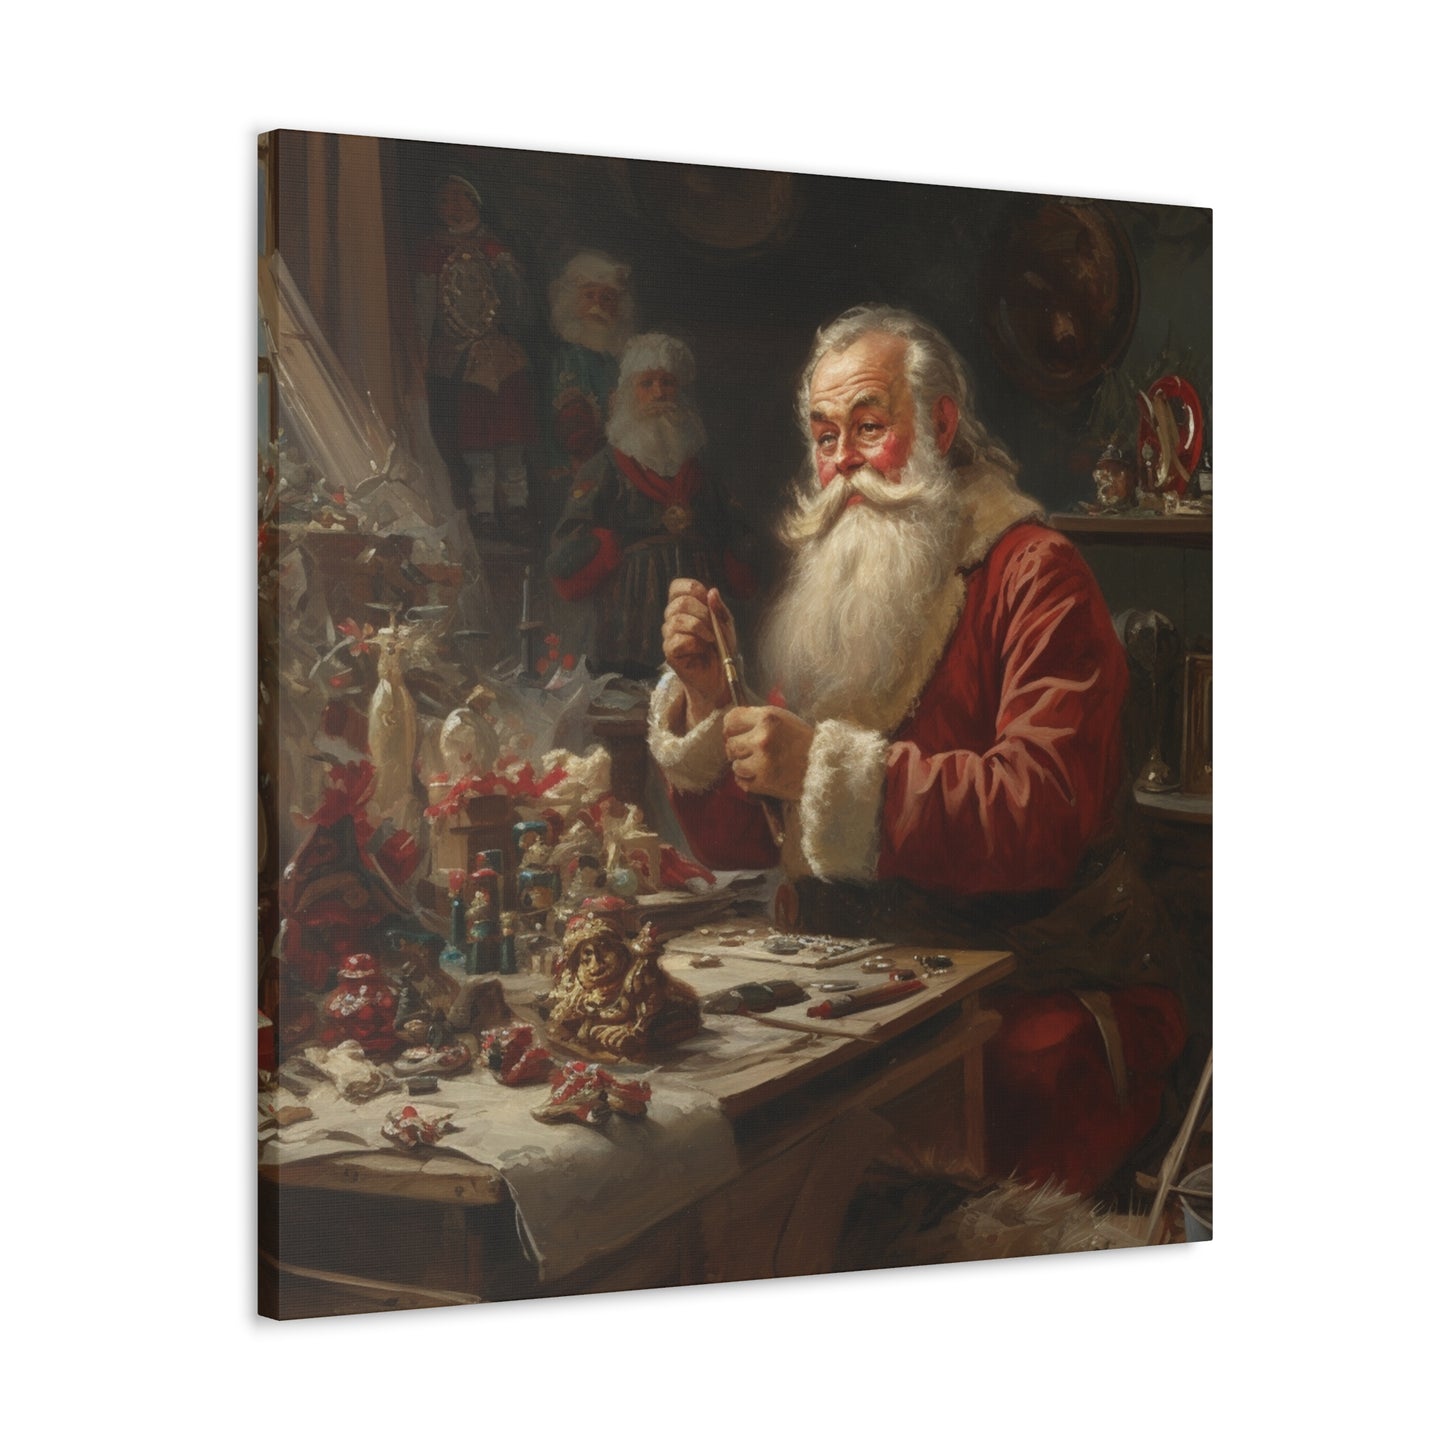 "Vintage Santa" Wall Art - Weave Got Gifts - Unique Gifts You Won’t Find Anywhere Else!